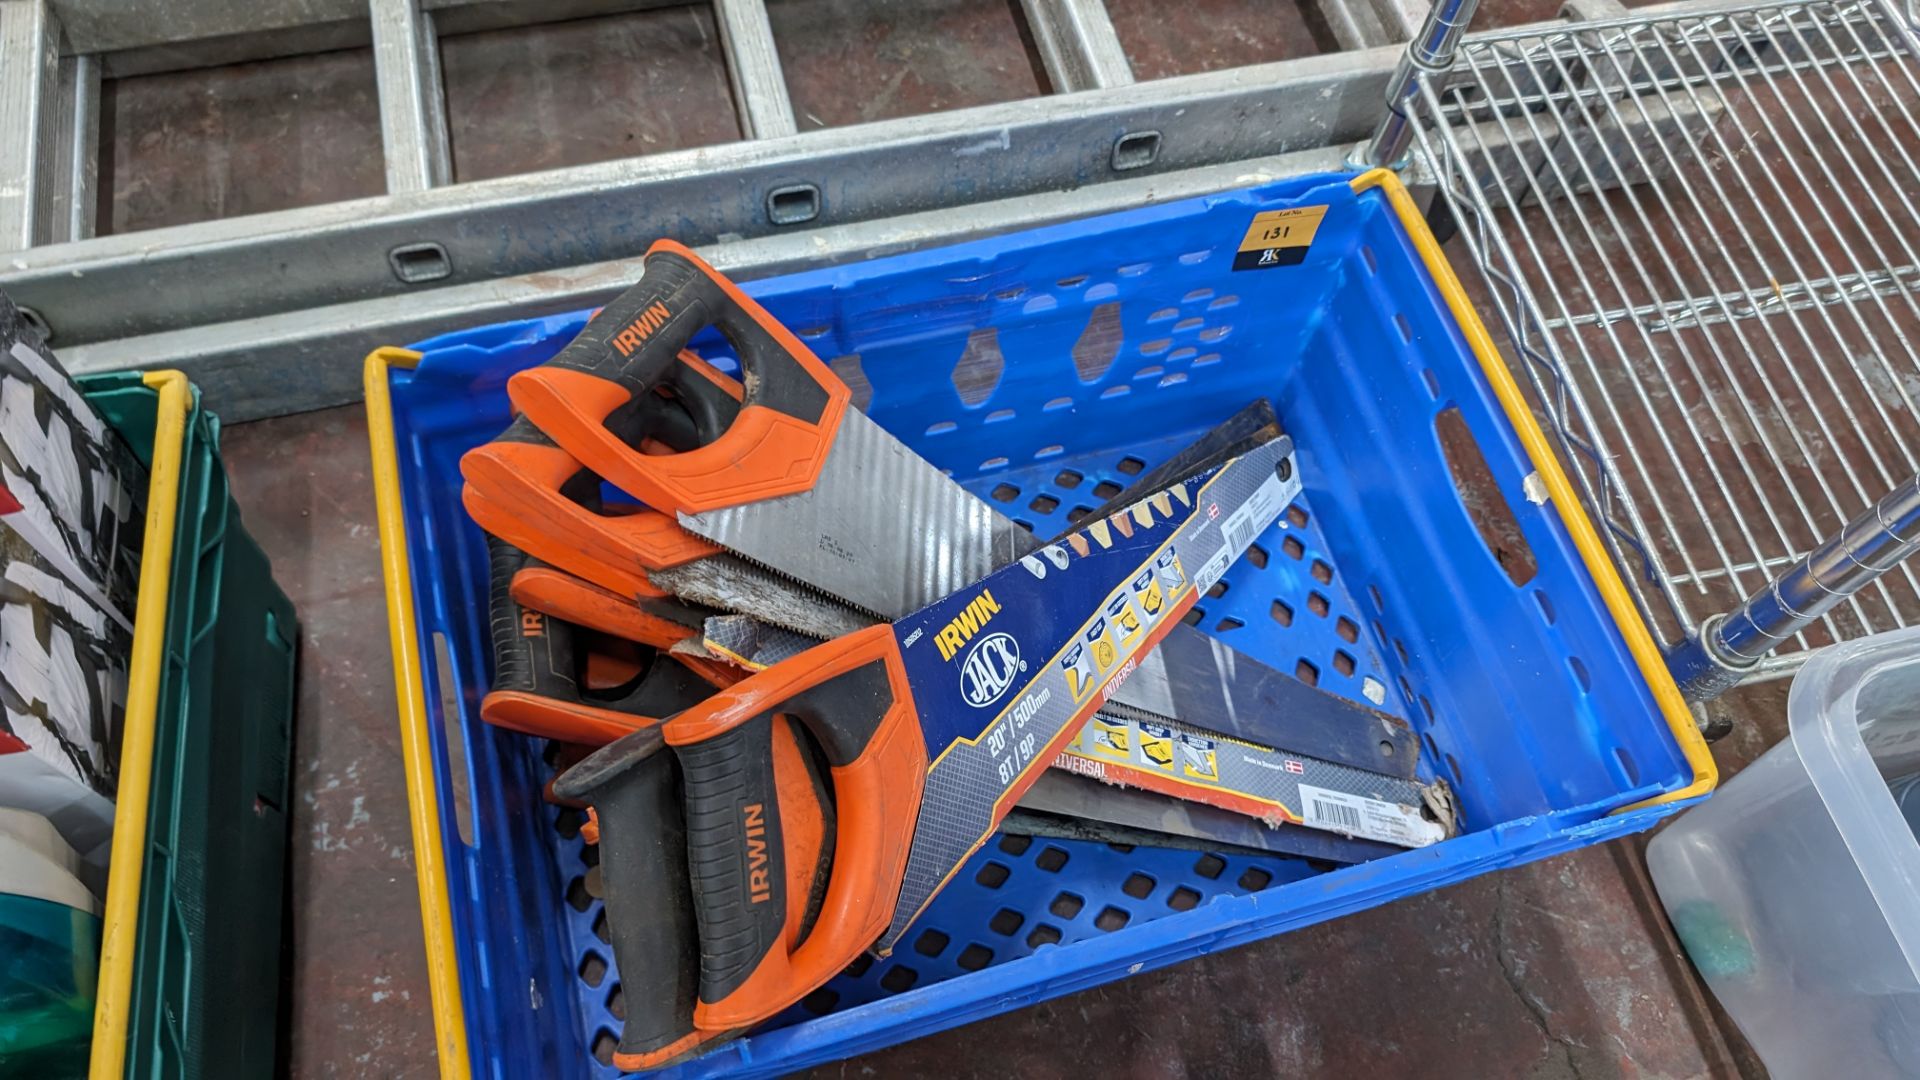 The contents of a crate of hand saws